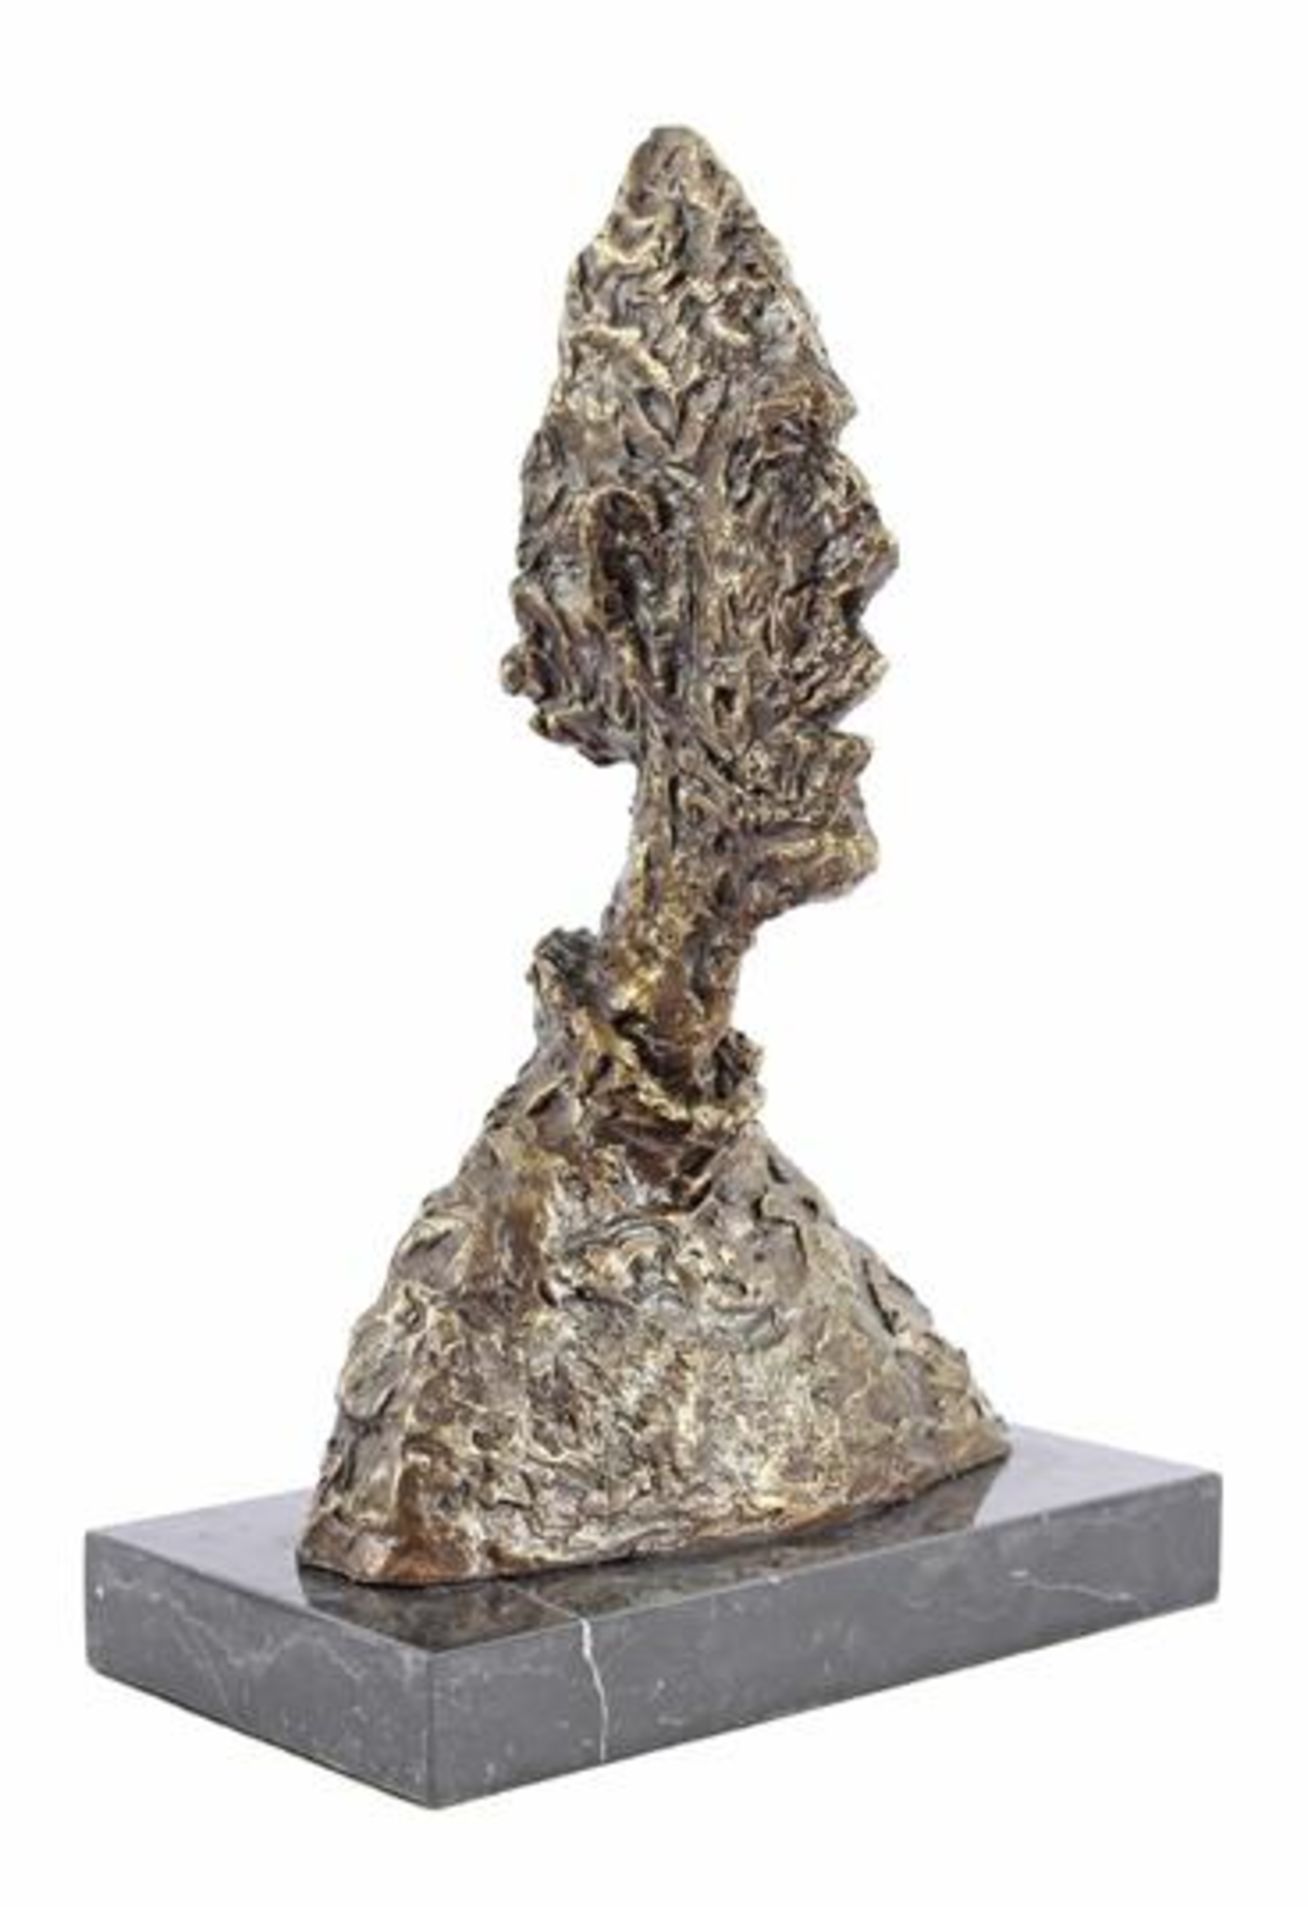 Bronze statue of a face, inspired by Giagometti, 34 cm high